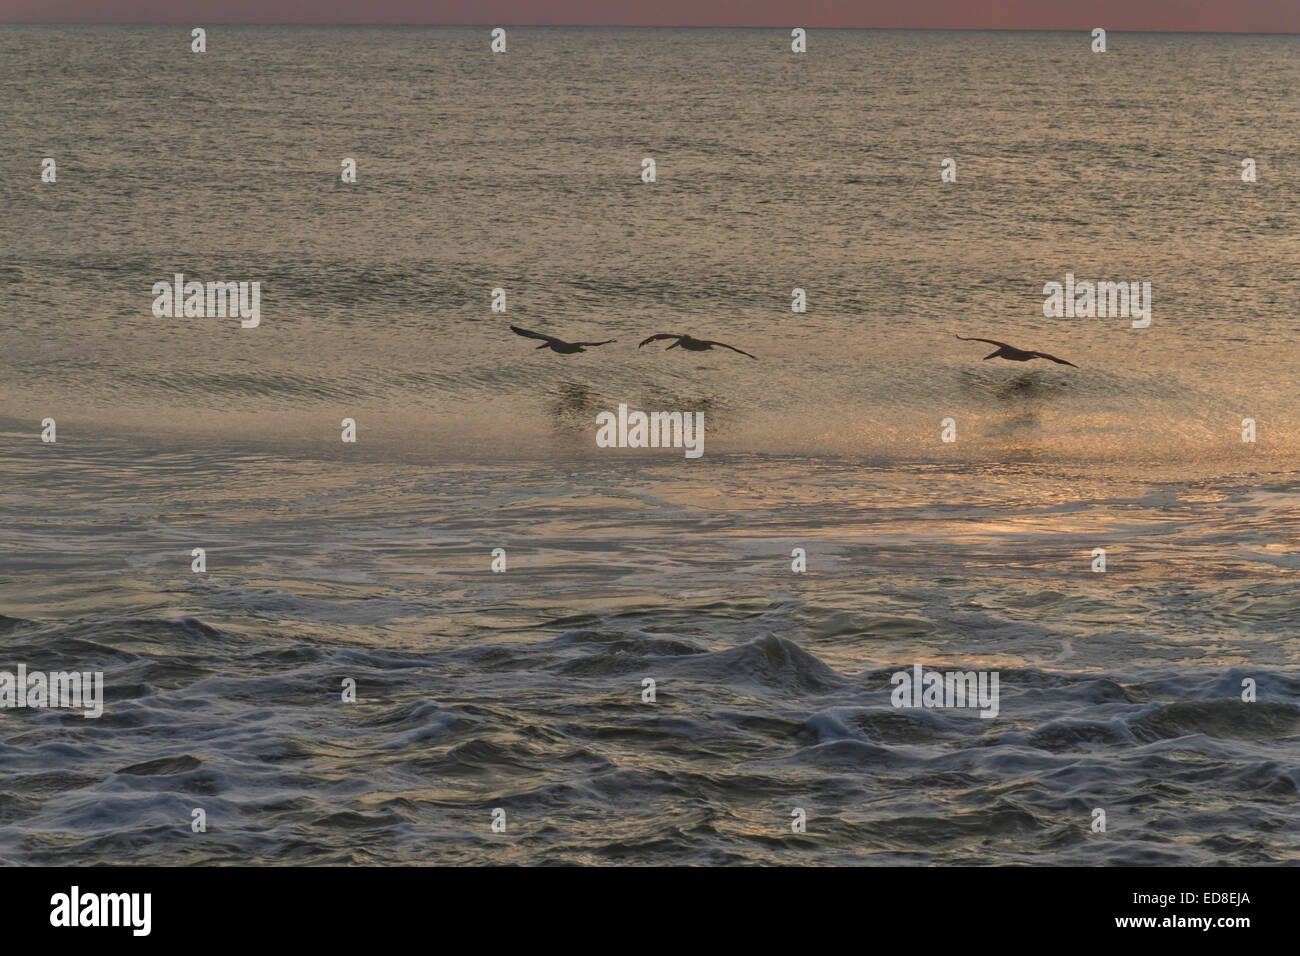 A row of three pelicans flying low over a becalmed ocean at sunset hunting for food Stock Photo